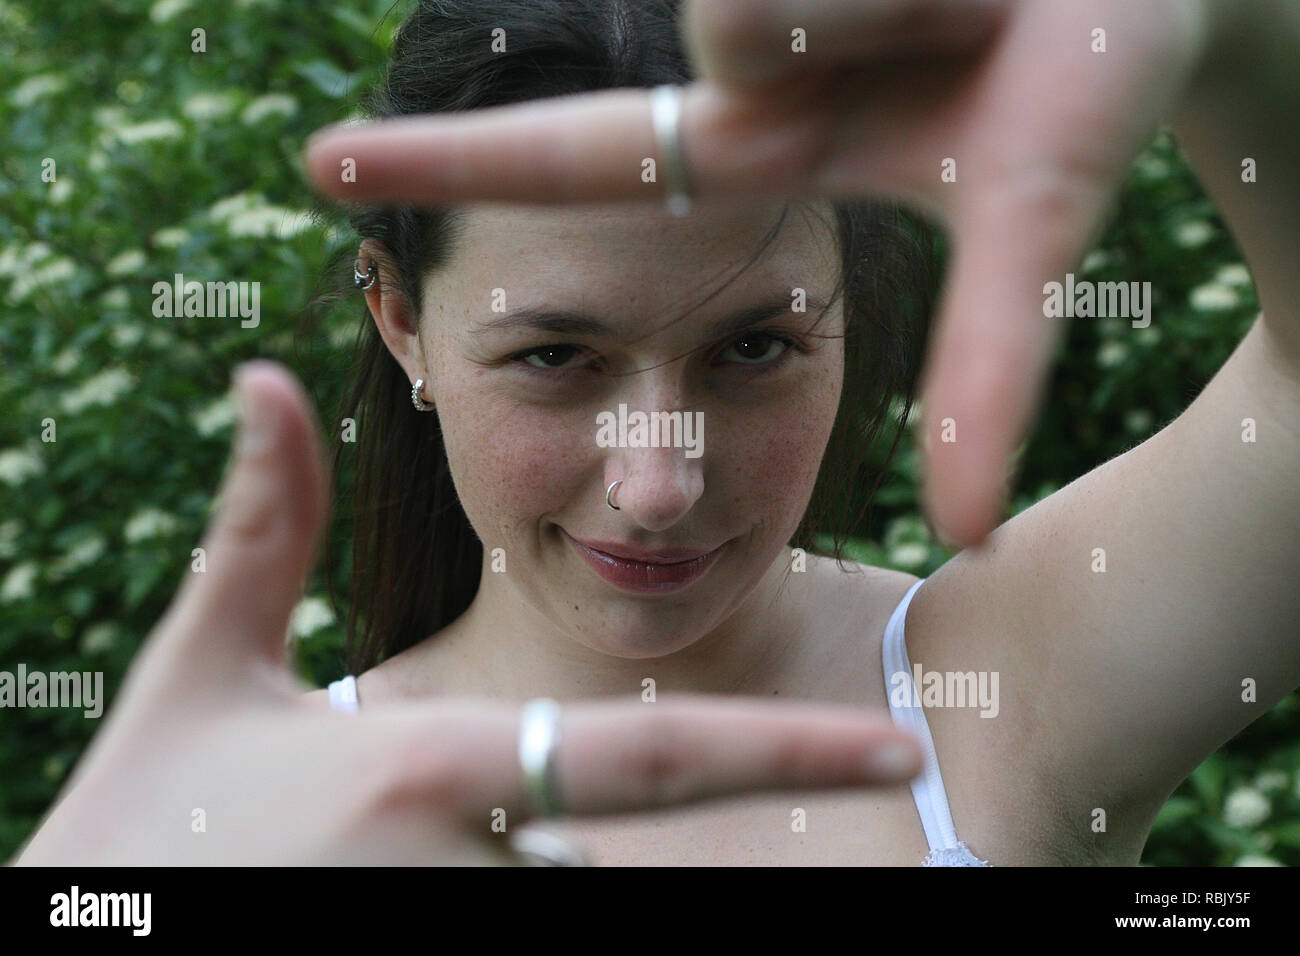 Brunette girl in a park outdoors on a sunny day giving hand signals Stock Photo